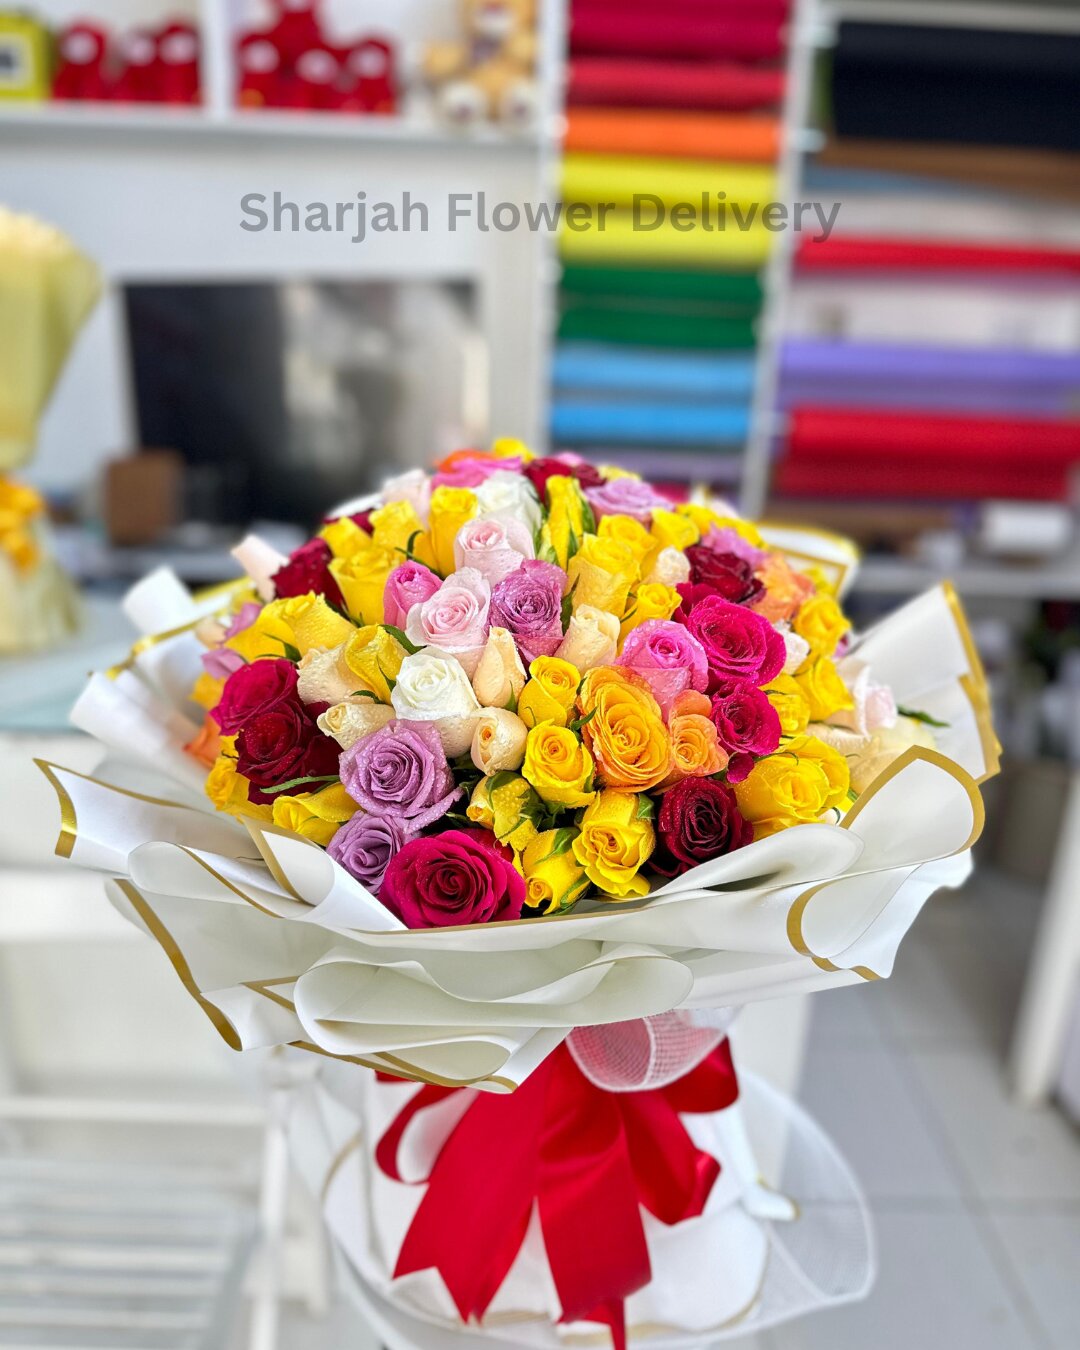  Blooms of Comfort: Sharjah Flower Delivery's Service to Zulekha Hospital